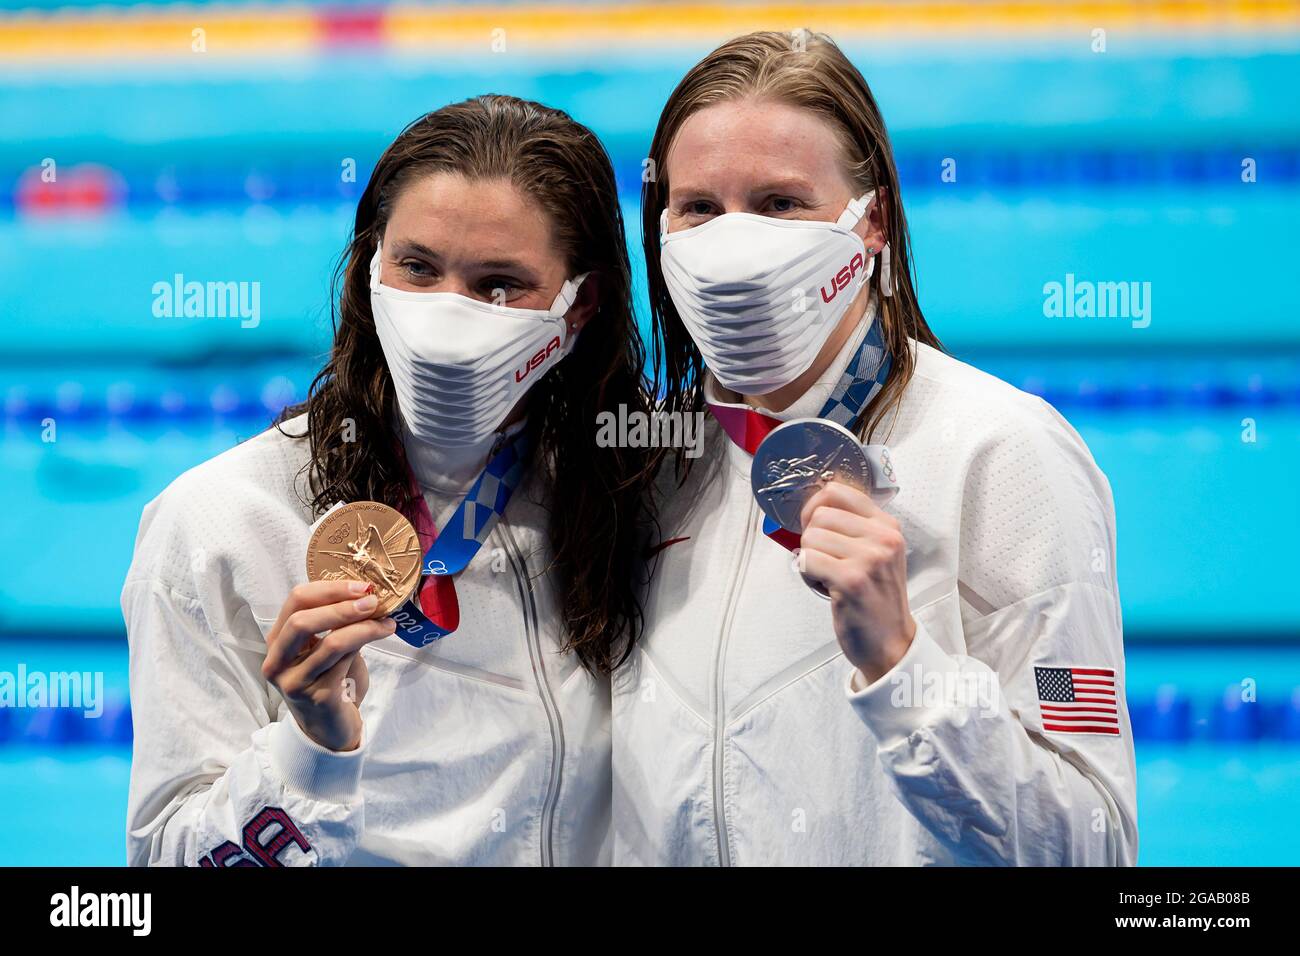 Tokyo, Japan. 30th July, 2021. TOKYO, JAPAN - JULY 30: Lilly King of United States, silver and Annie Lazor of United States, bronze, show the medals after competing in the women 200m Breaststroke final during the Tokyo 2020 Olympic Games at the Tokyo Aquatics Centre on July 30, 2021 in Tokyo, Japan (Photo by Giorgio Scala/Insidefoto/Deepbluemedia) Credit: insidefoto srl/Alamy Live News Stock Photo